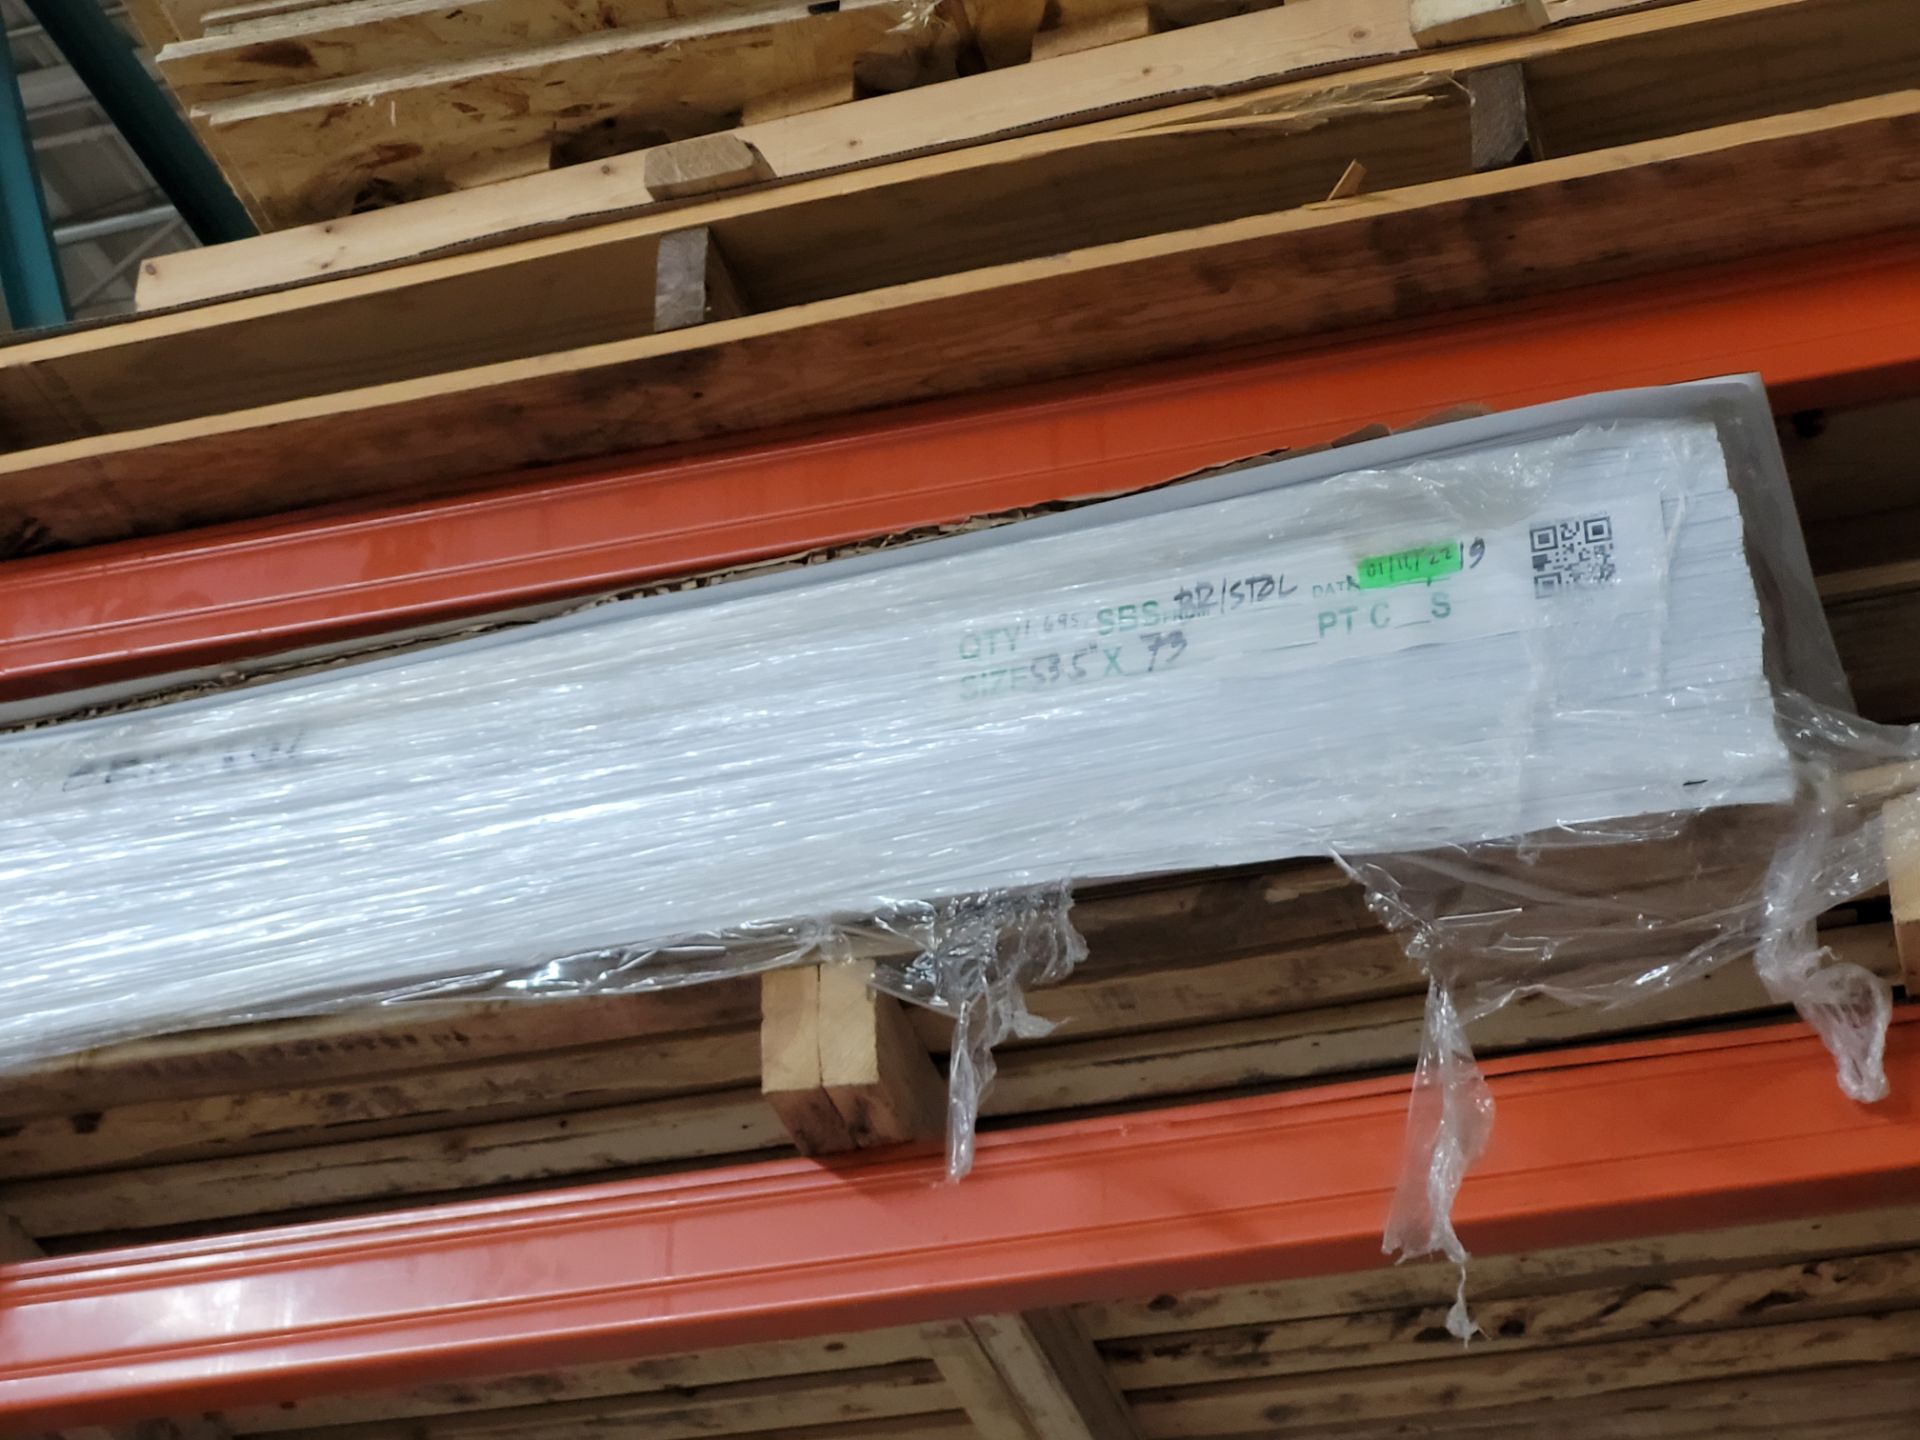 Lot of (4) Pallets and Contents of Sheets incl. STYREME PEF 20pt, 107/ct, 48x26, 4ct SINTRA 39.5x48 - Image 4 of 4